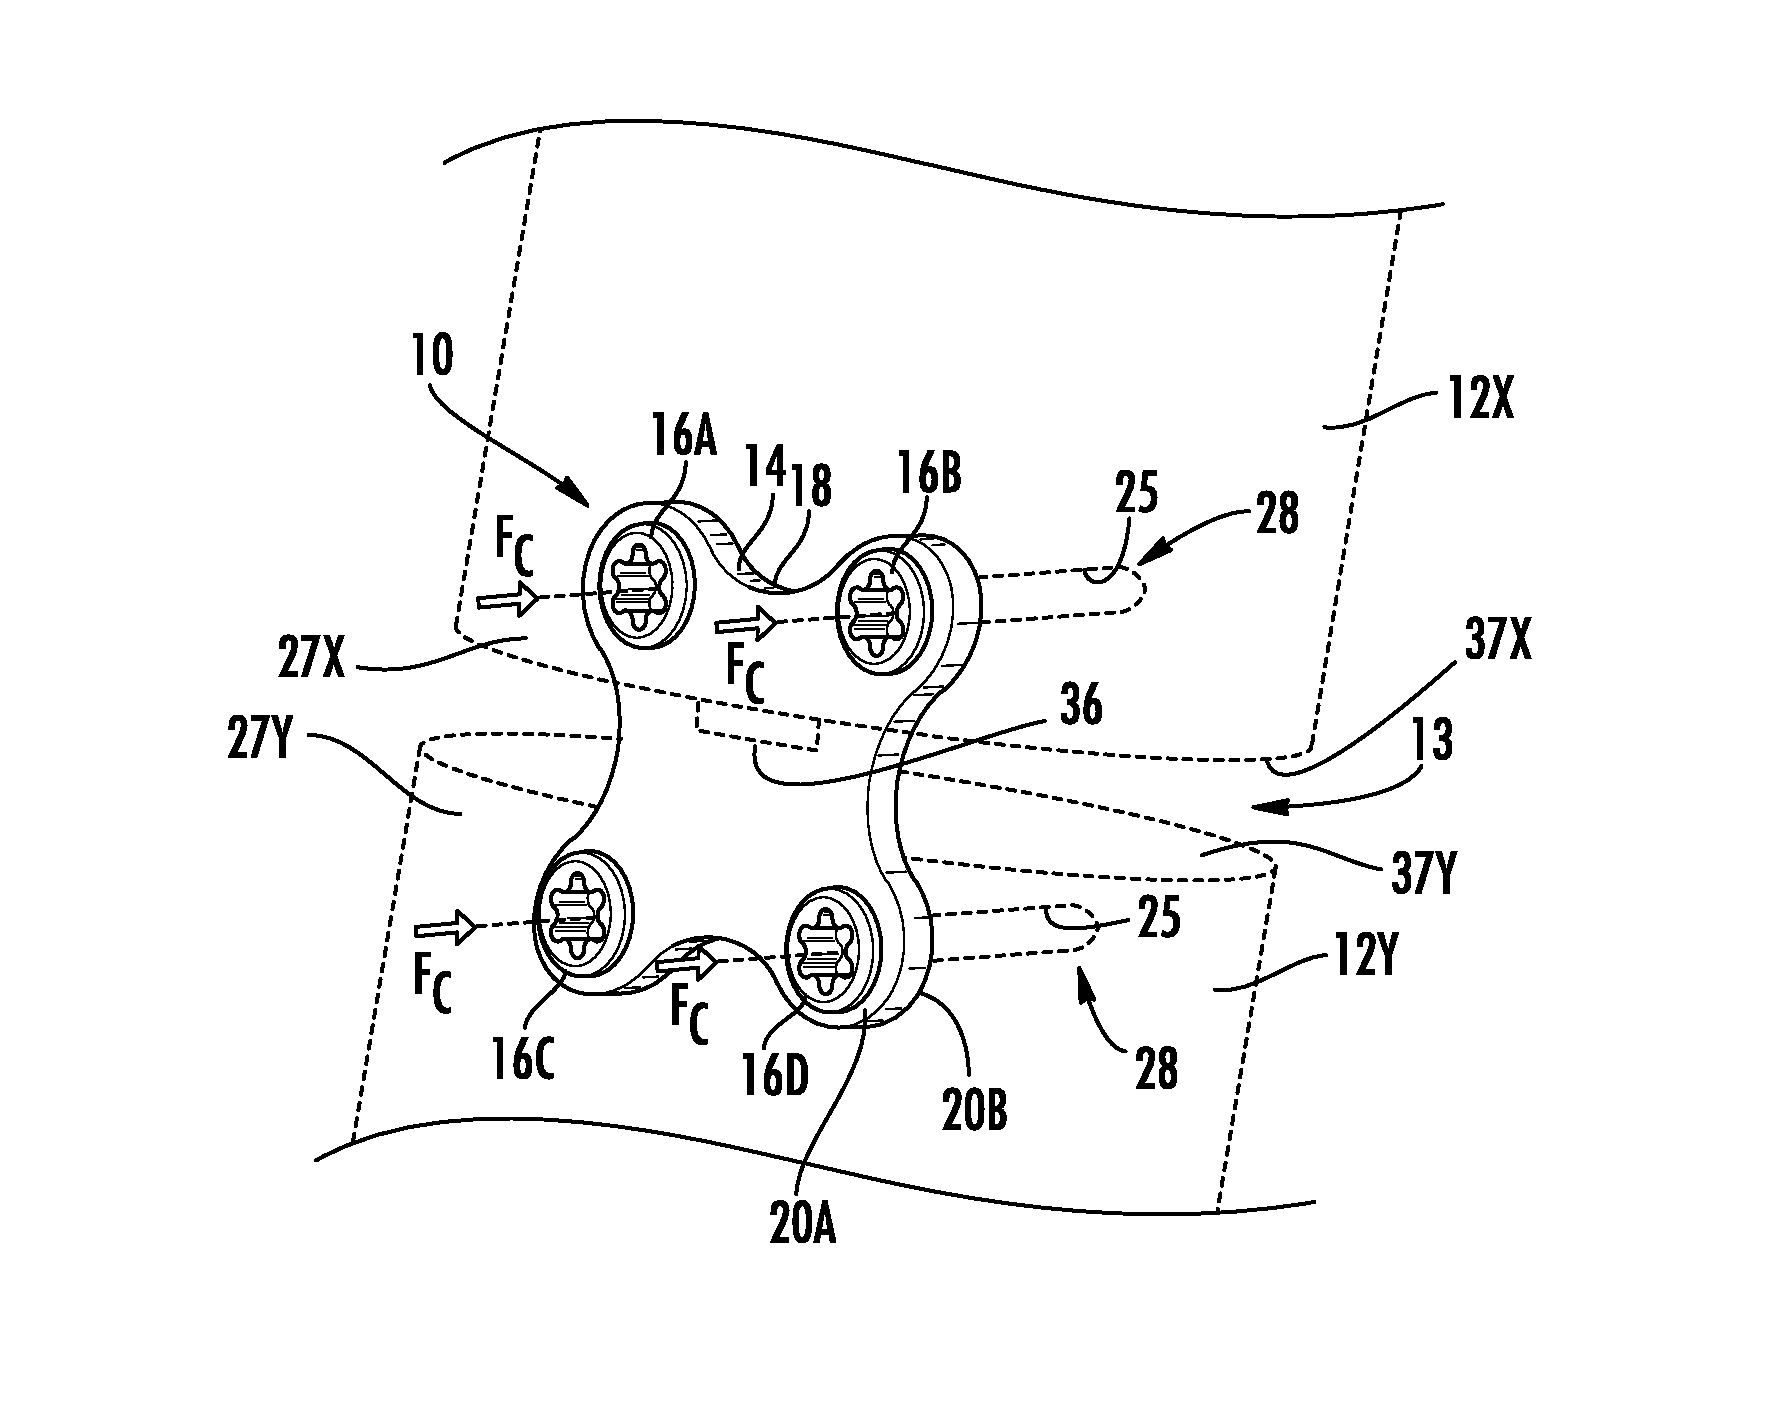 Anterior Cervical Plates For Spinal Surgery Employing Anchor Blackout Prevention Devices, And Related Systems And Methods